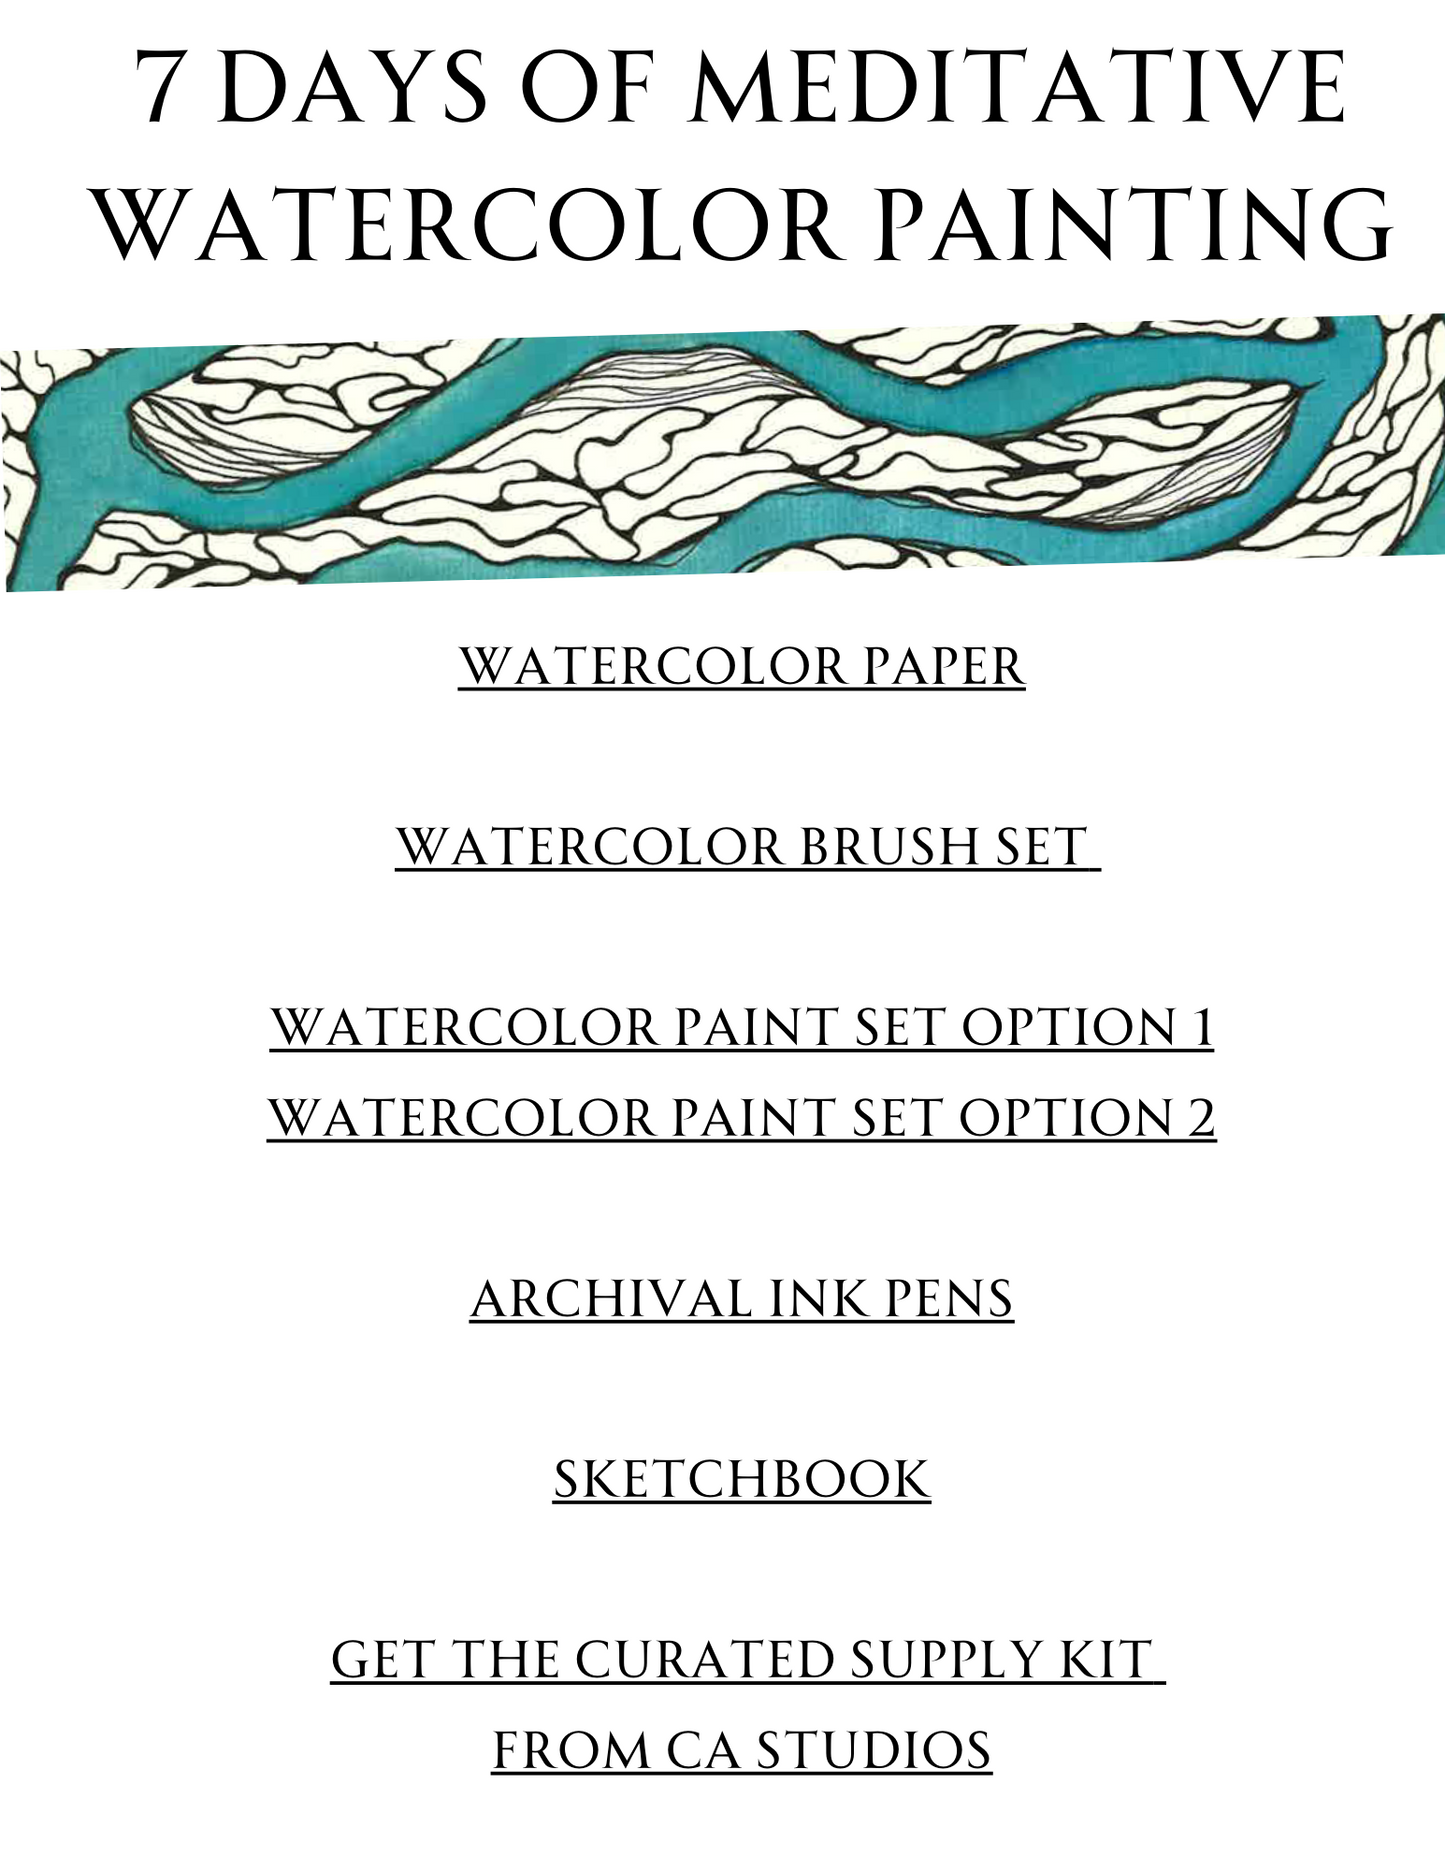 7 Days of Meditative Watercolor Painting Challenge!